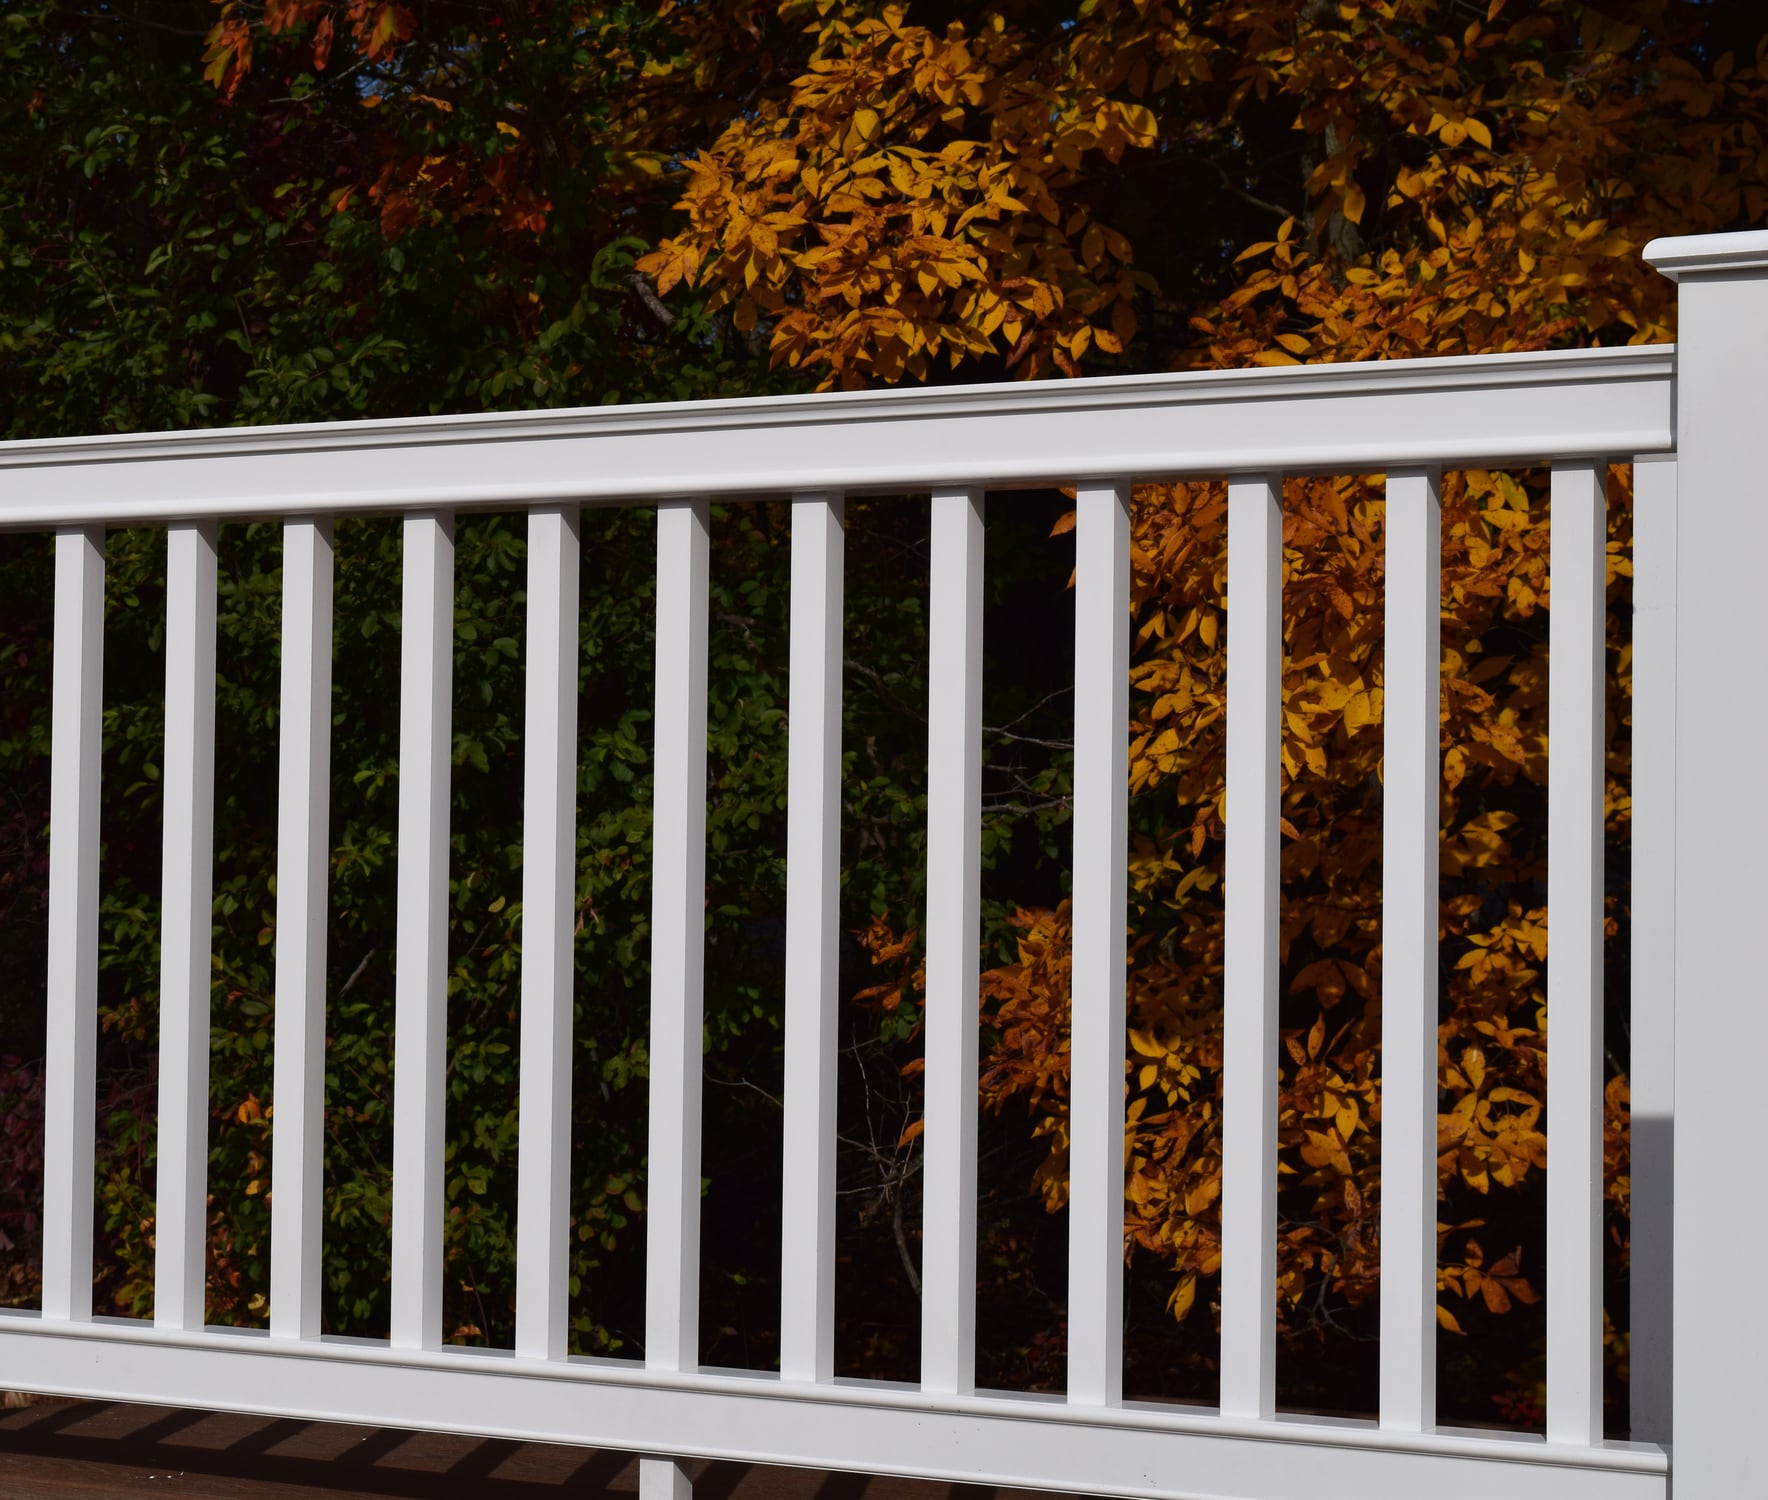 TimberTech Statement 6-ft x 2.75-in x 36-in White PVC Deck Rail Kit in ...